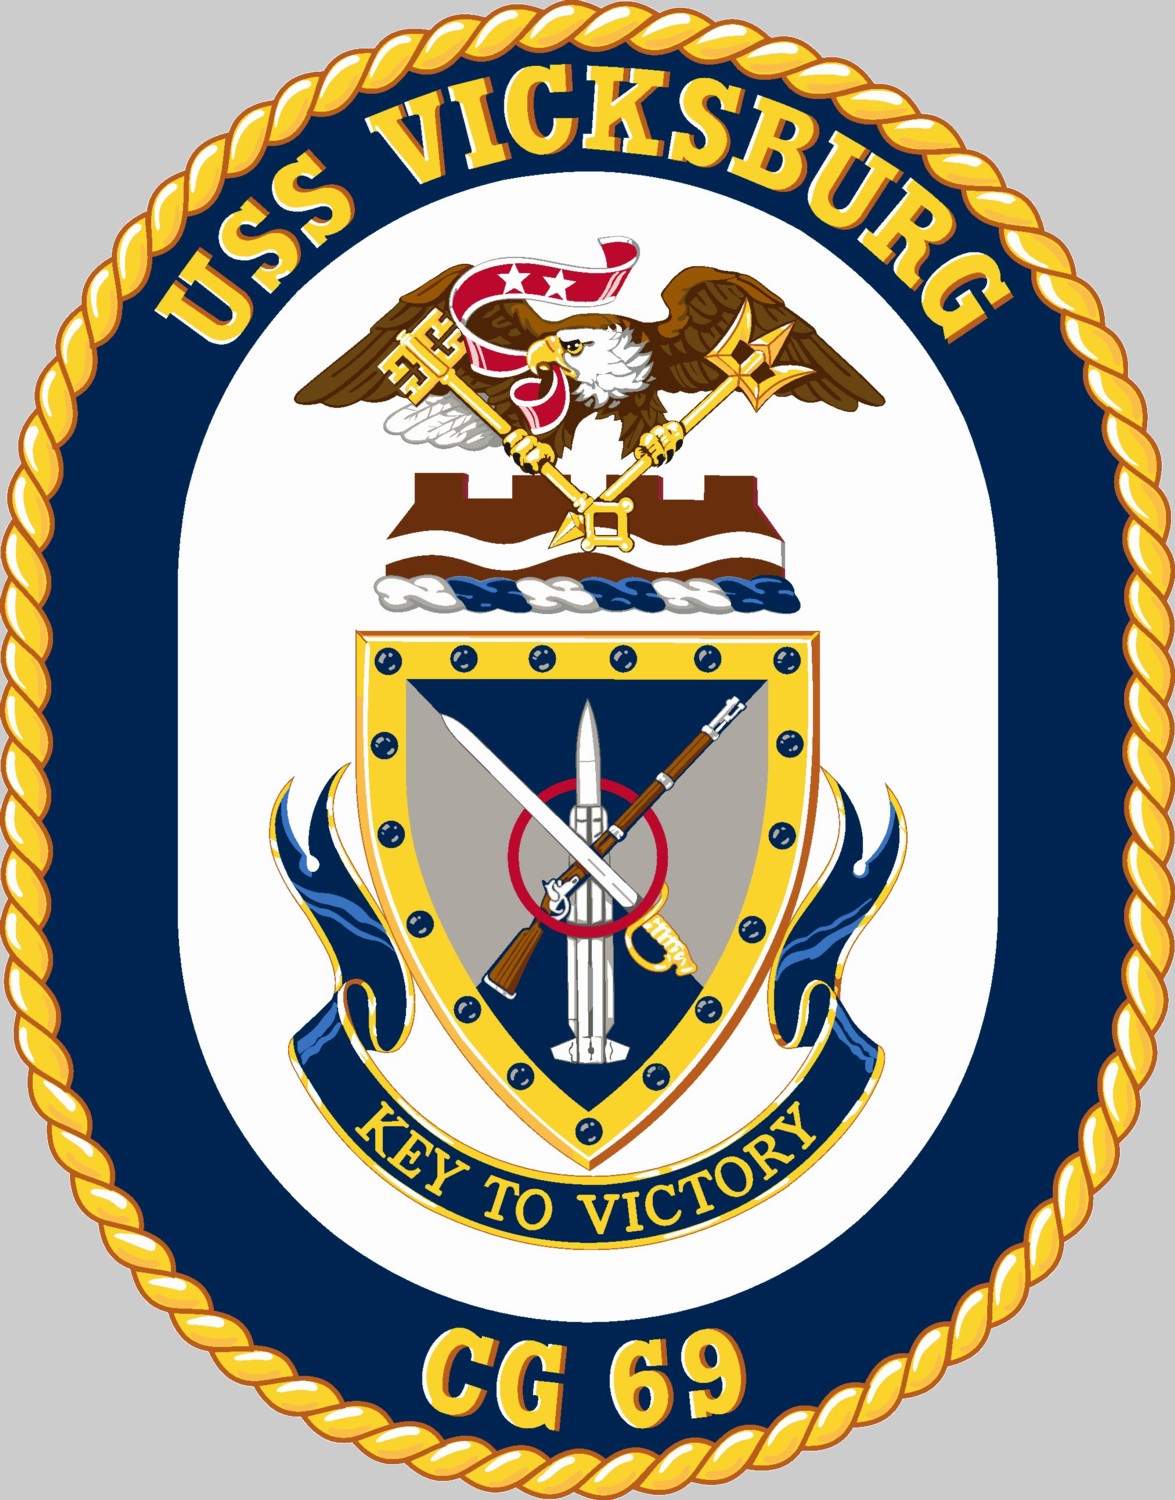 cg-69 uss vicksburg insignia crest patch badge guided missile cruiser us navy 02x